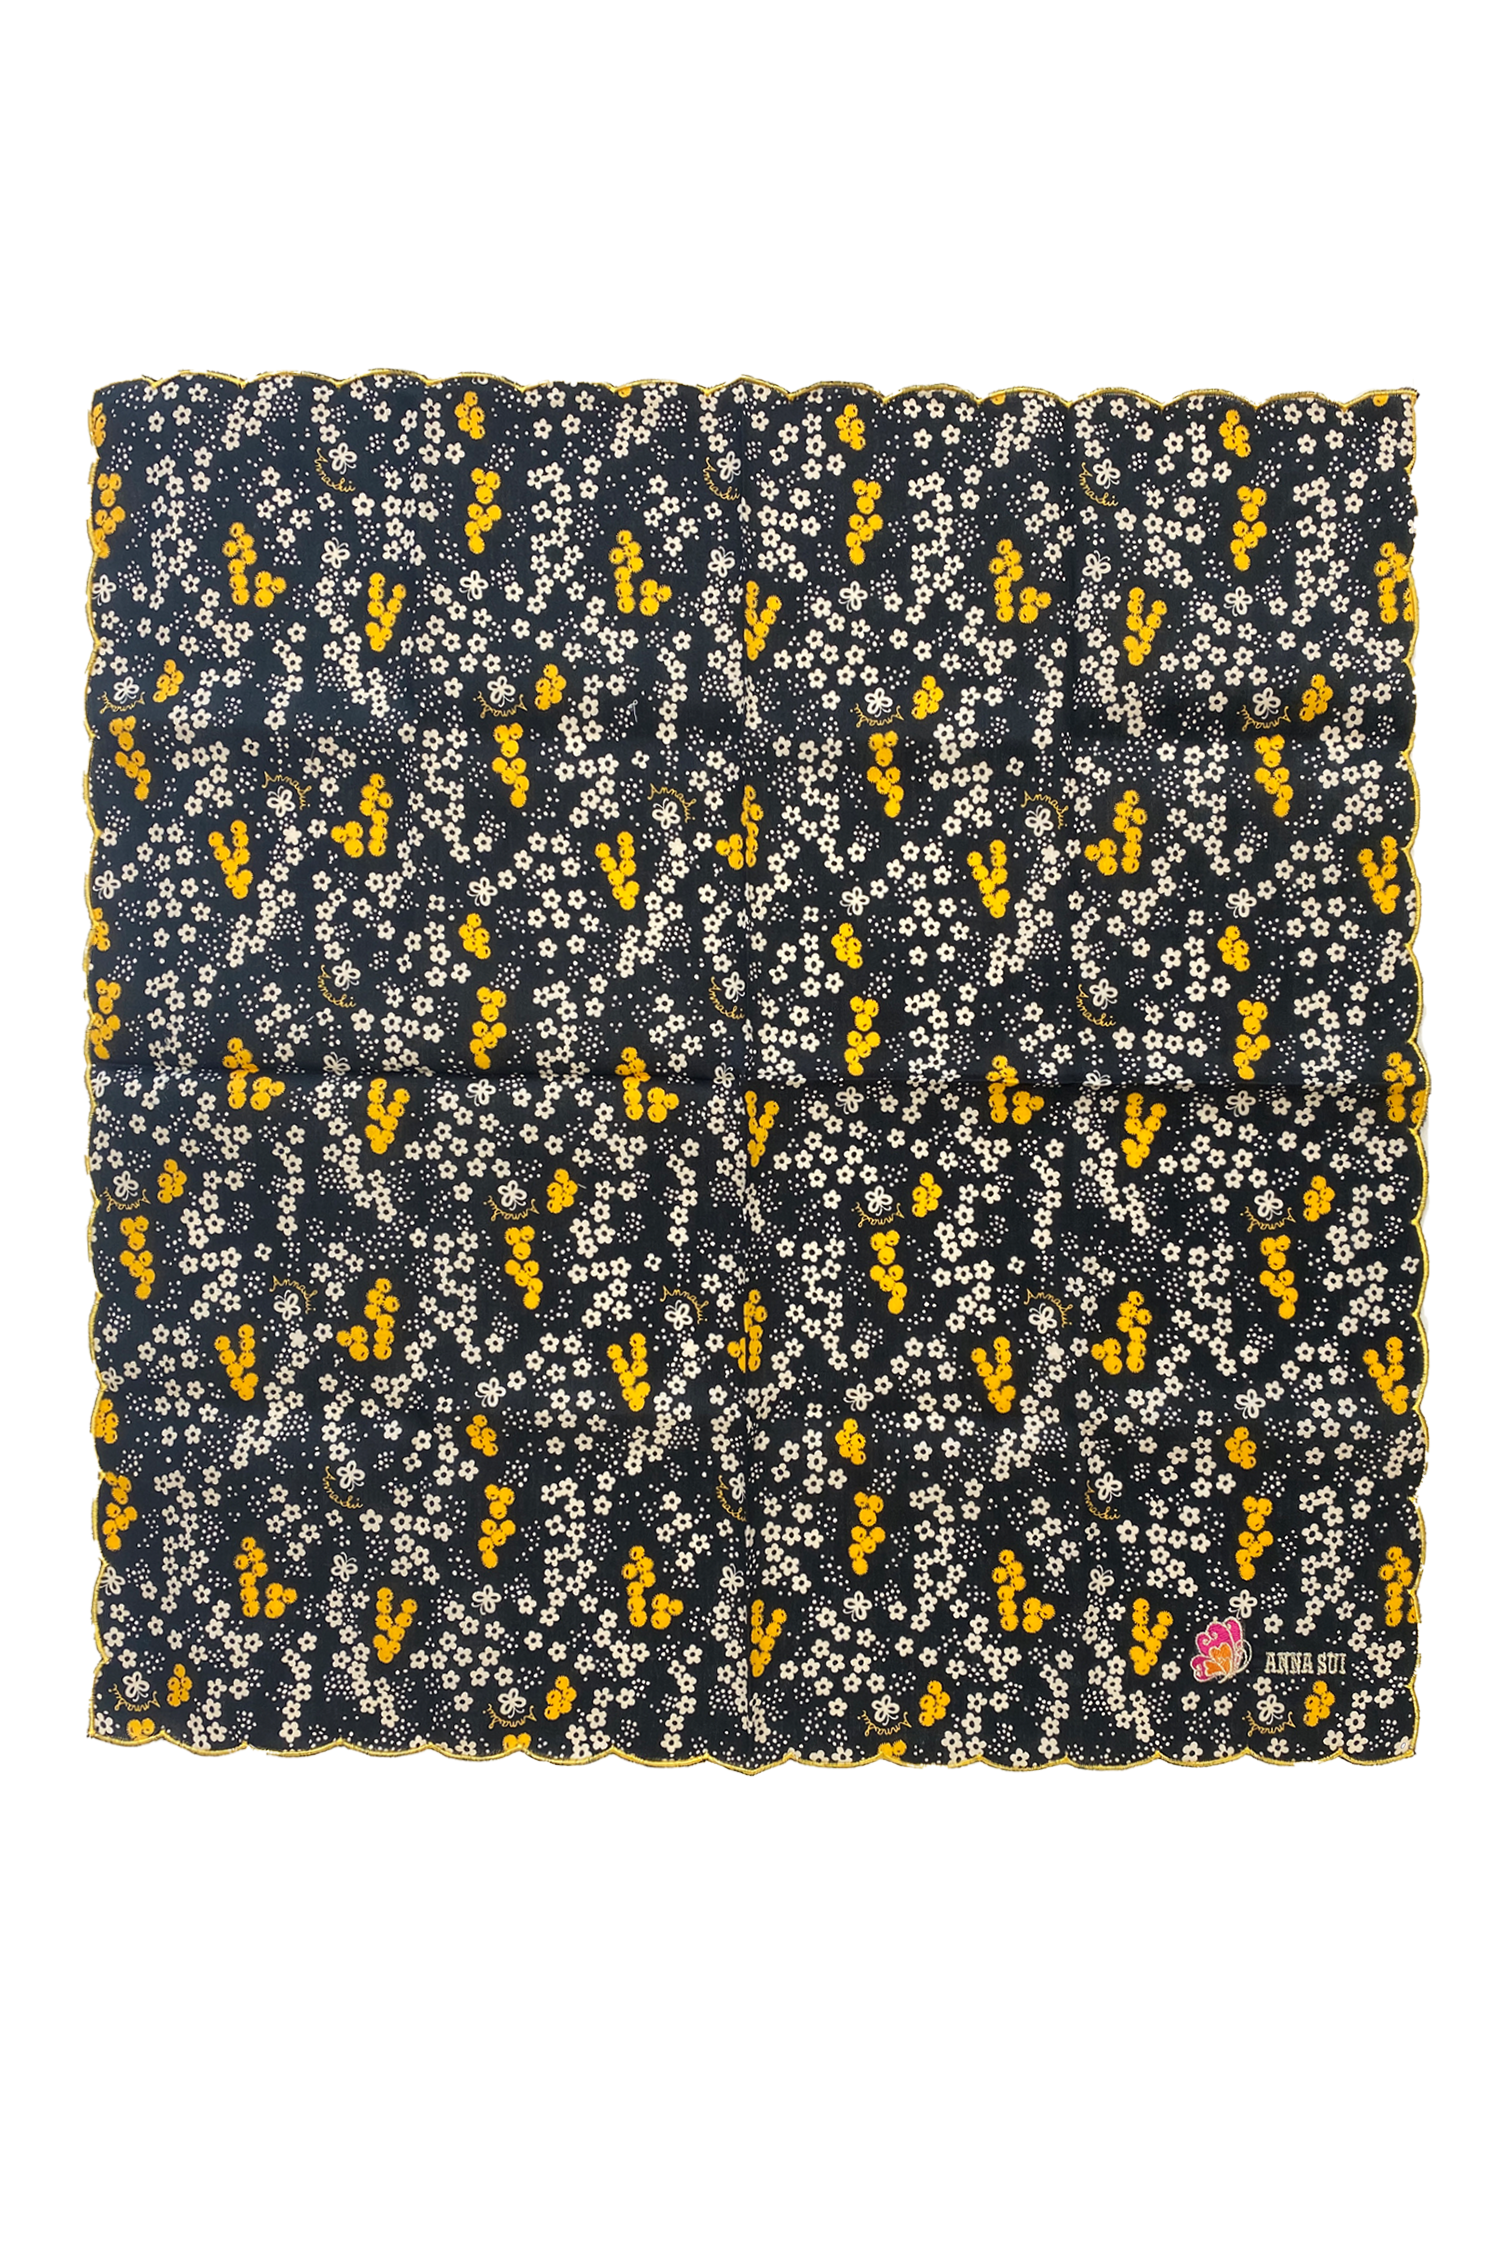 Handkerchief, squared, white daisies on a blackish color and yellow dots, Anna’s label in a corner